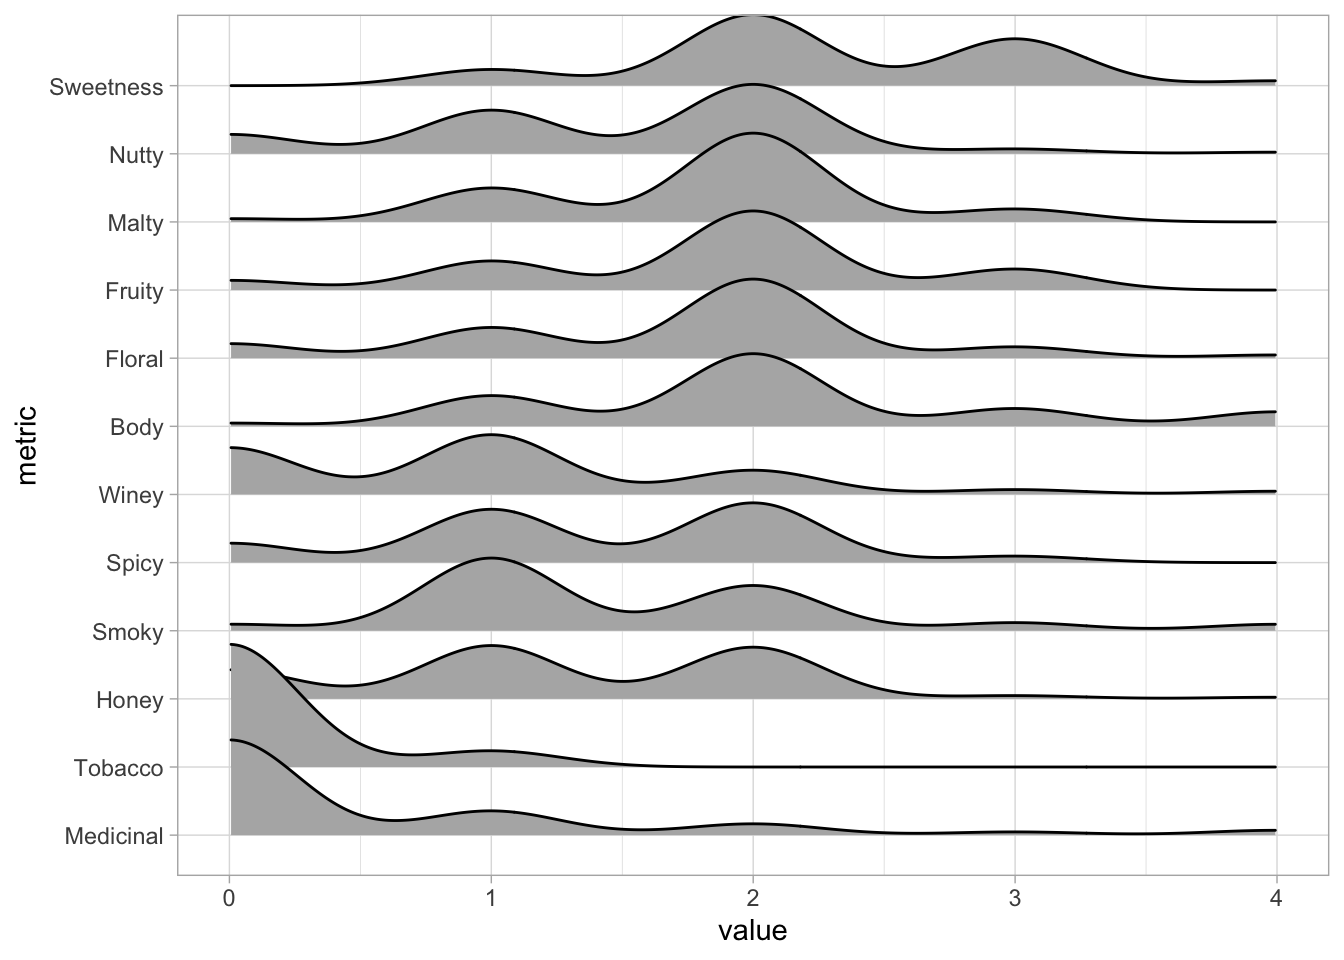 Ridge plot showing the distribution of ratings for each flavour characteristics.